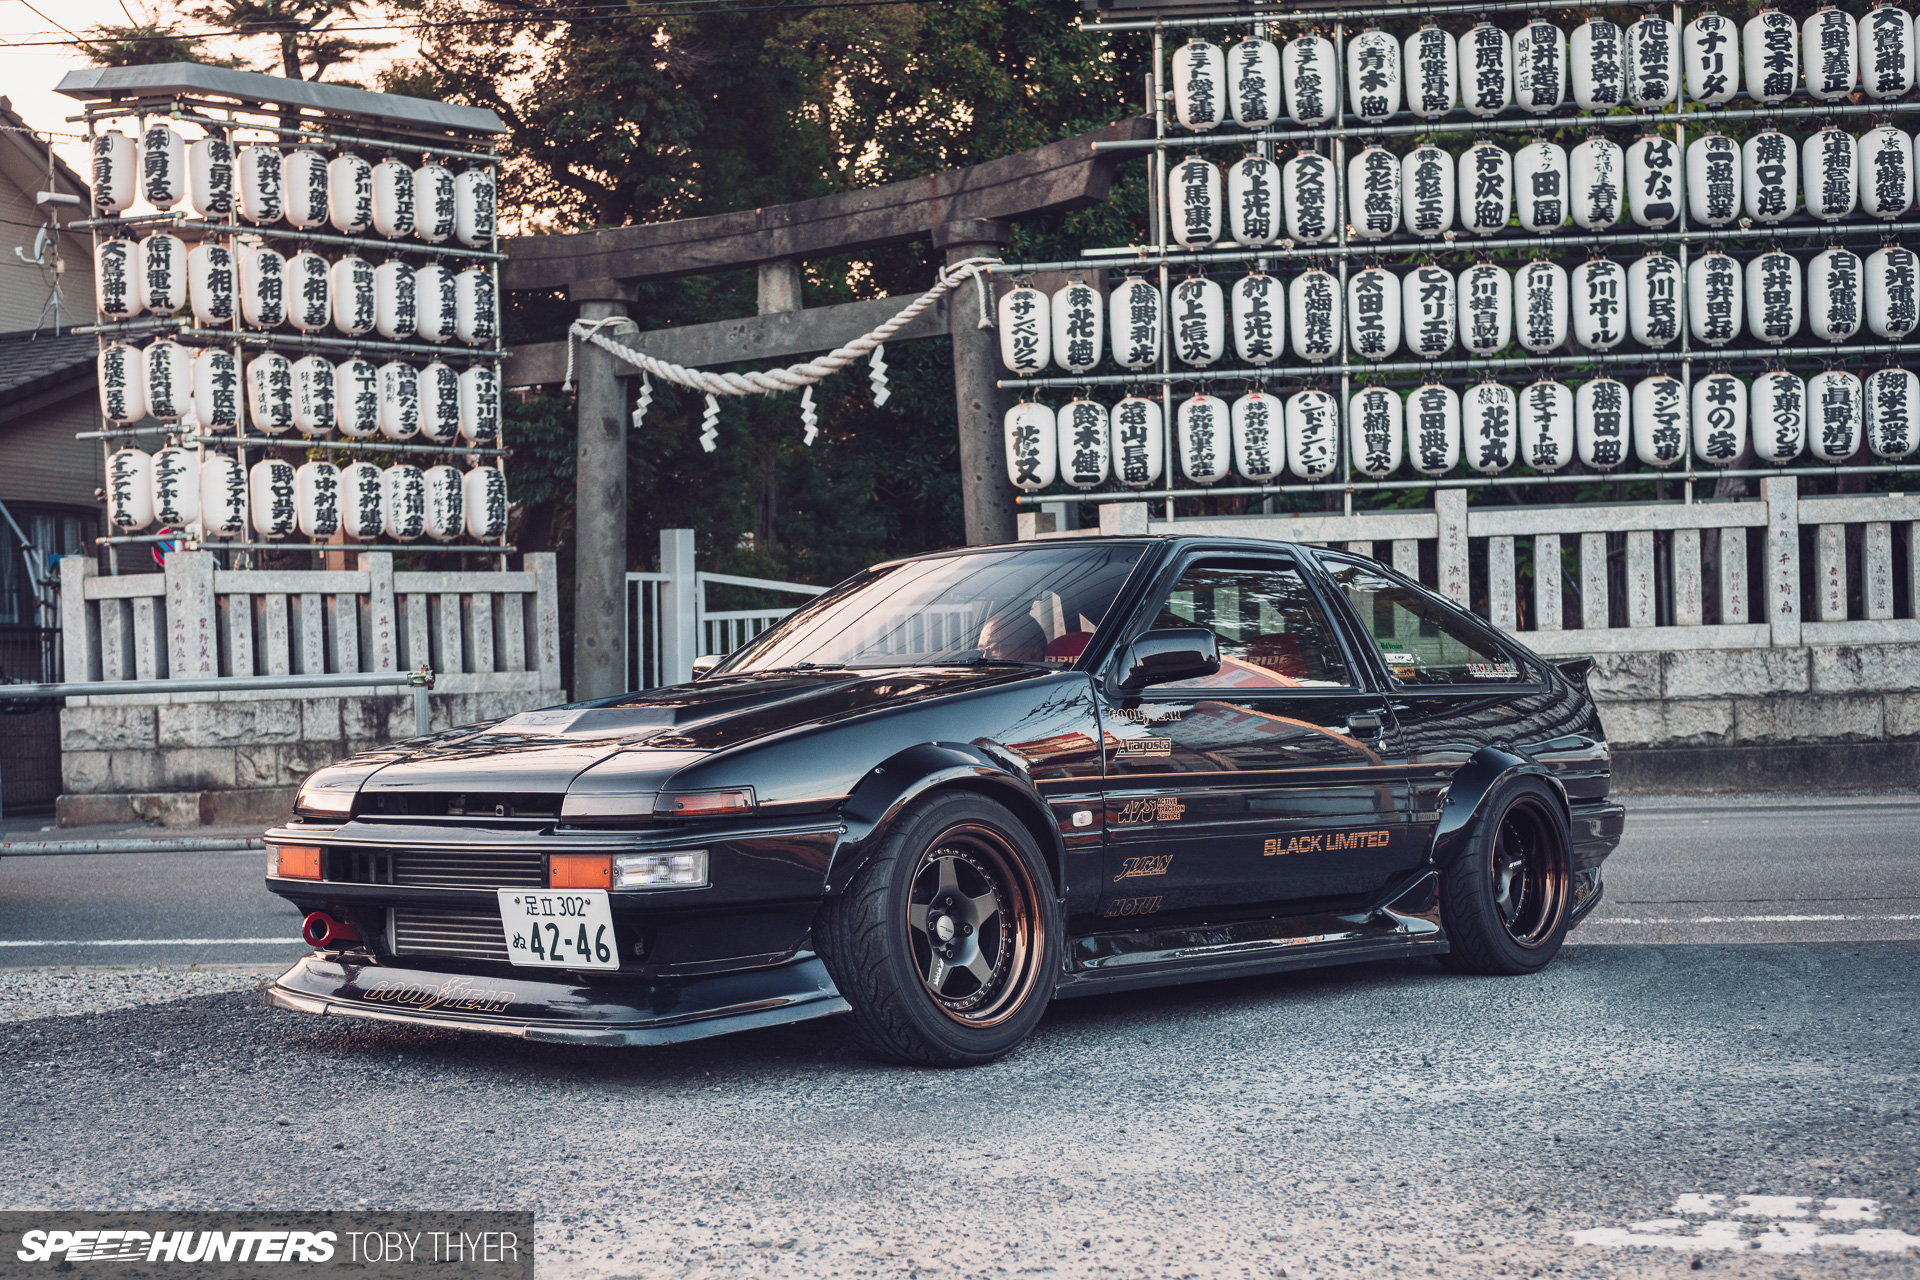 Tec-Art's Black Limited: The Rarest AE86, Modified By The Best